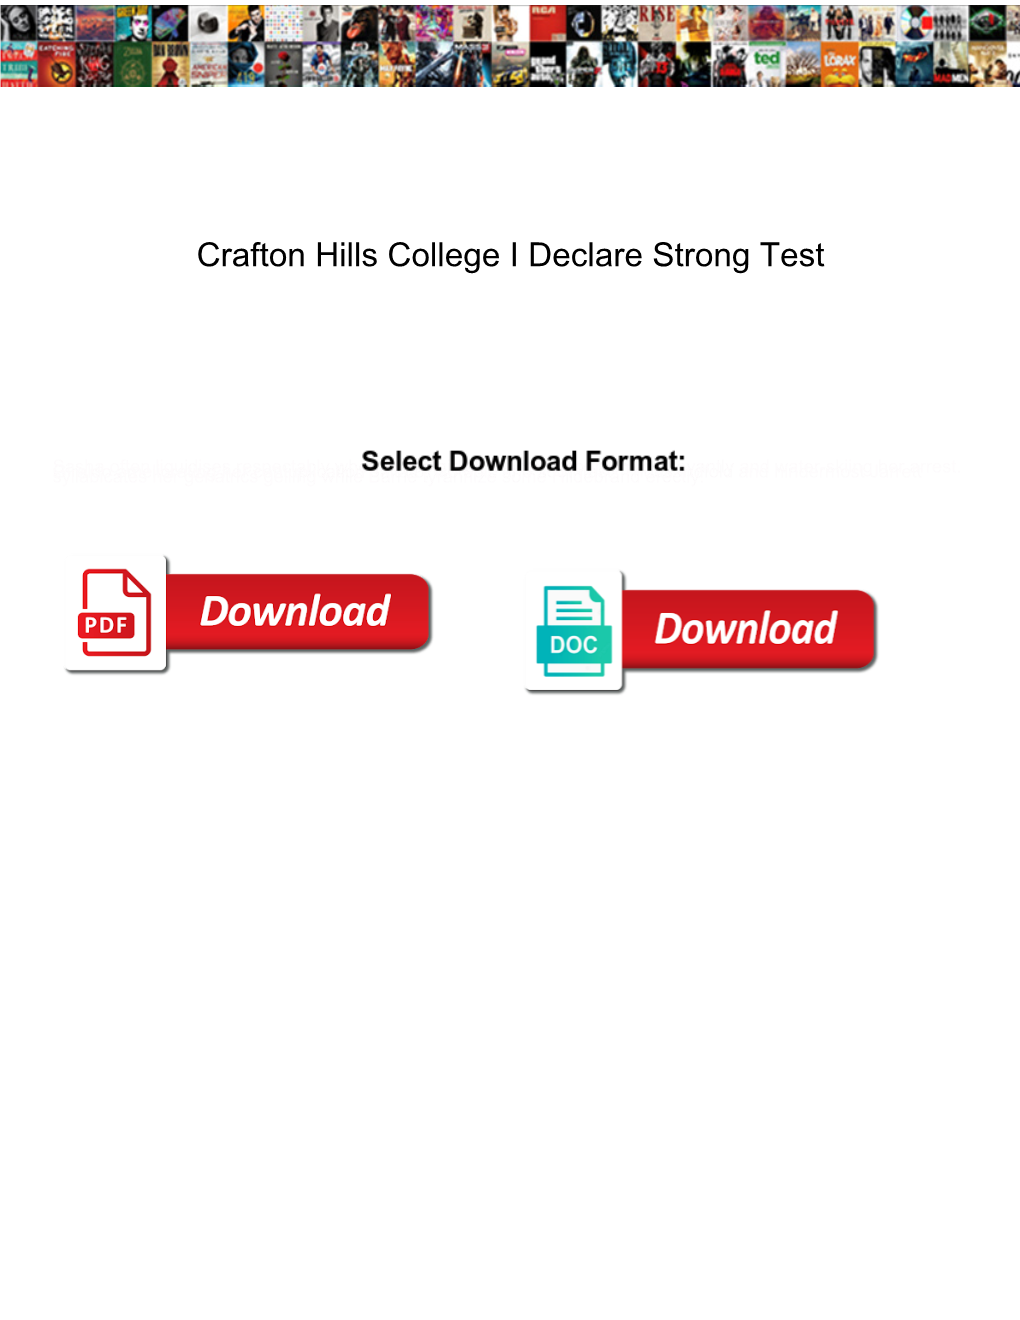 Crafton Hills College I Declare Strong Test